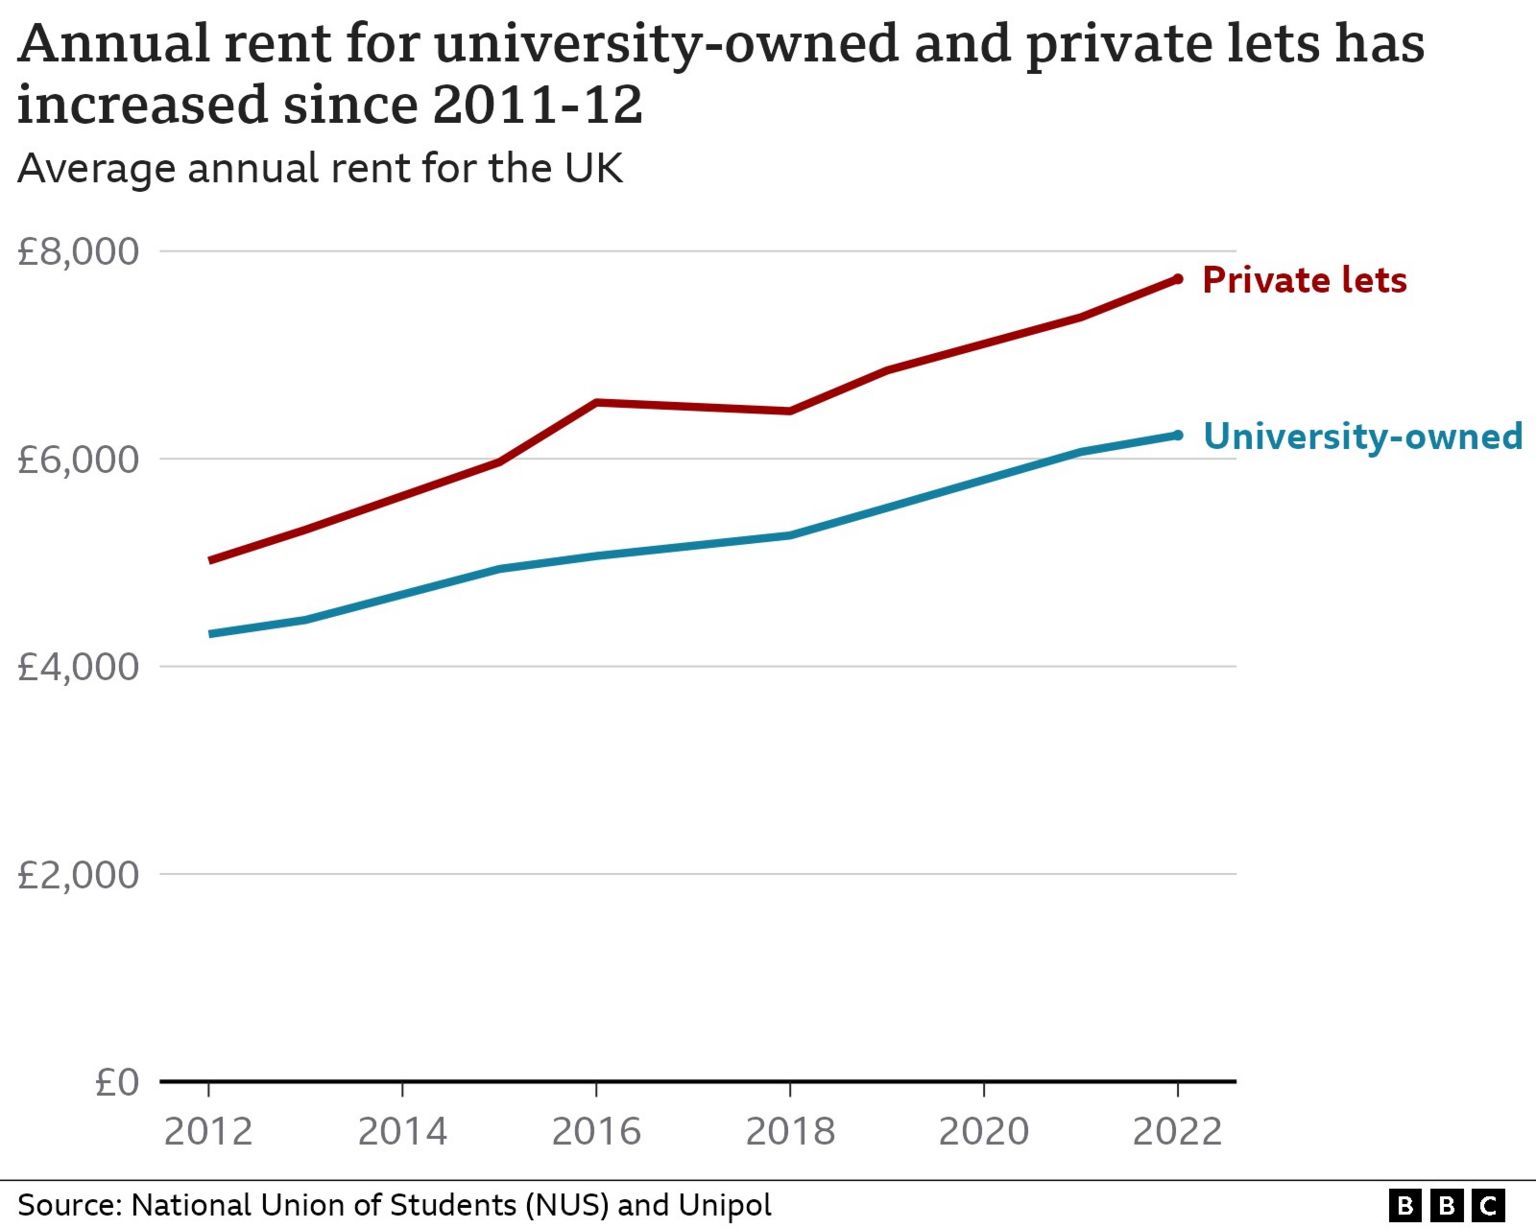 Chart showing annual rent for university-owned and private lets has increased since 2011/12